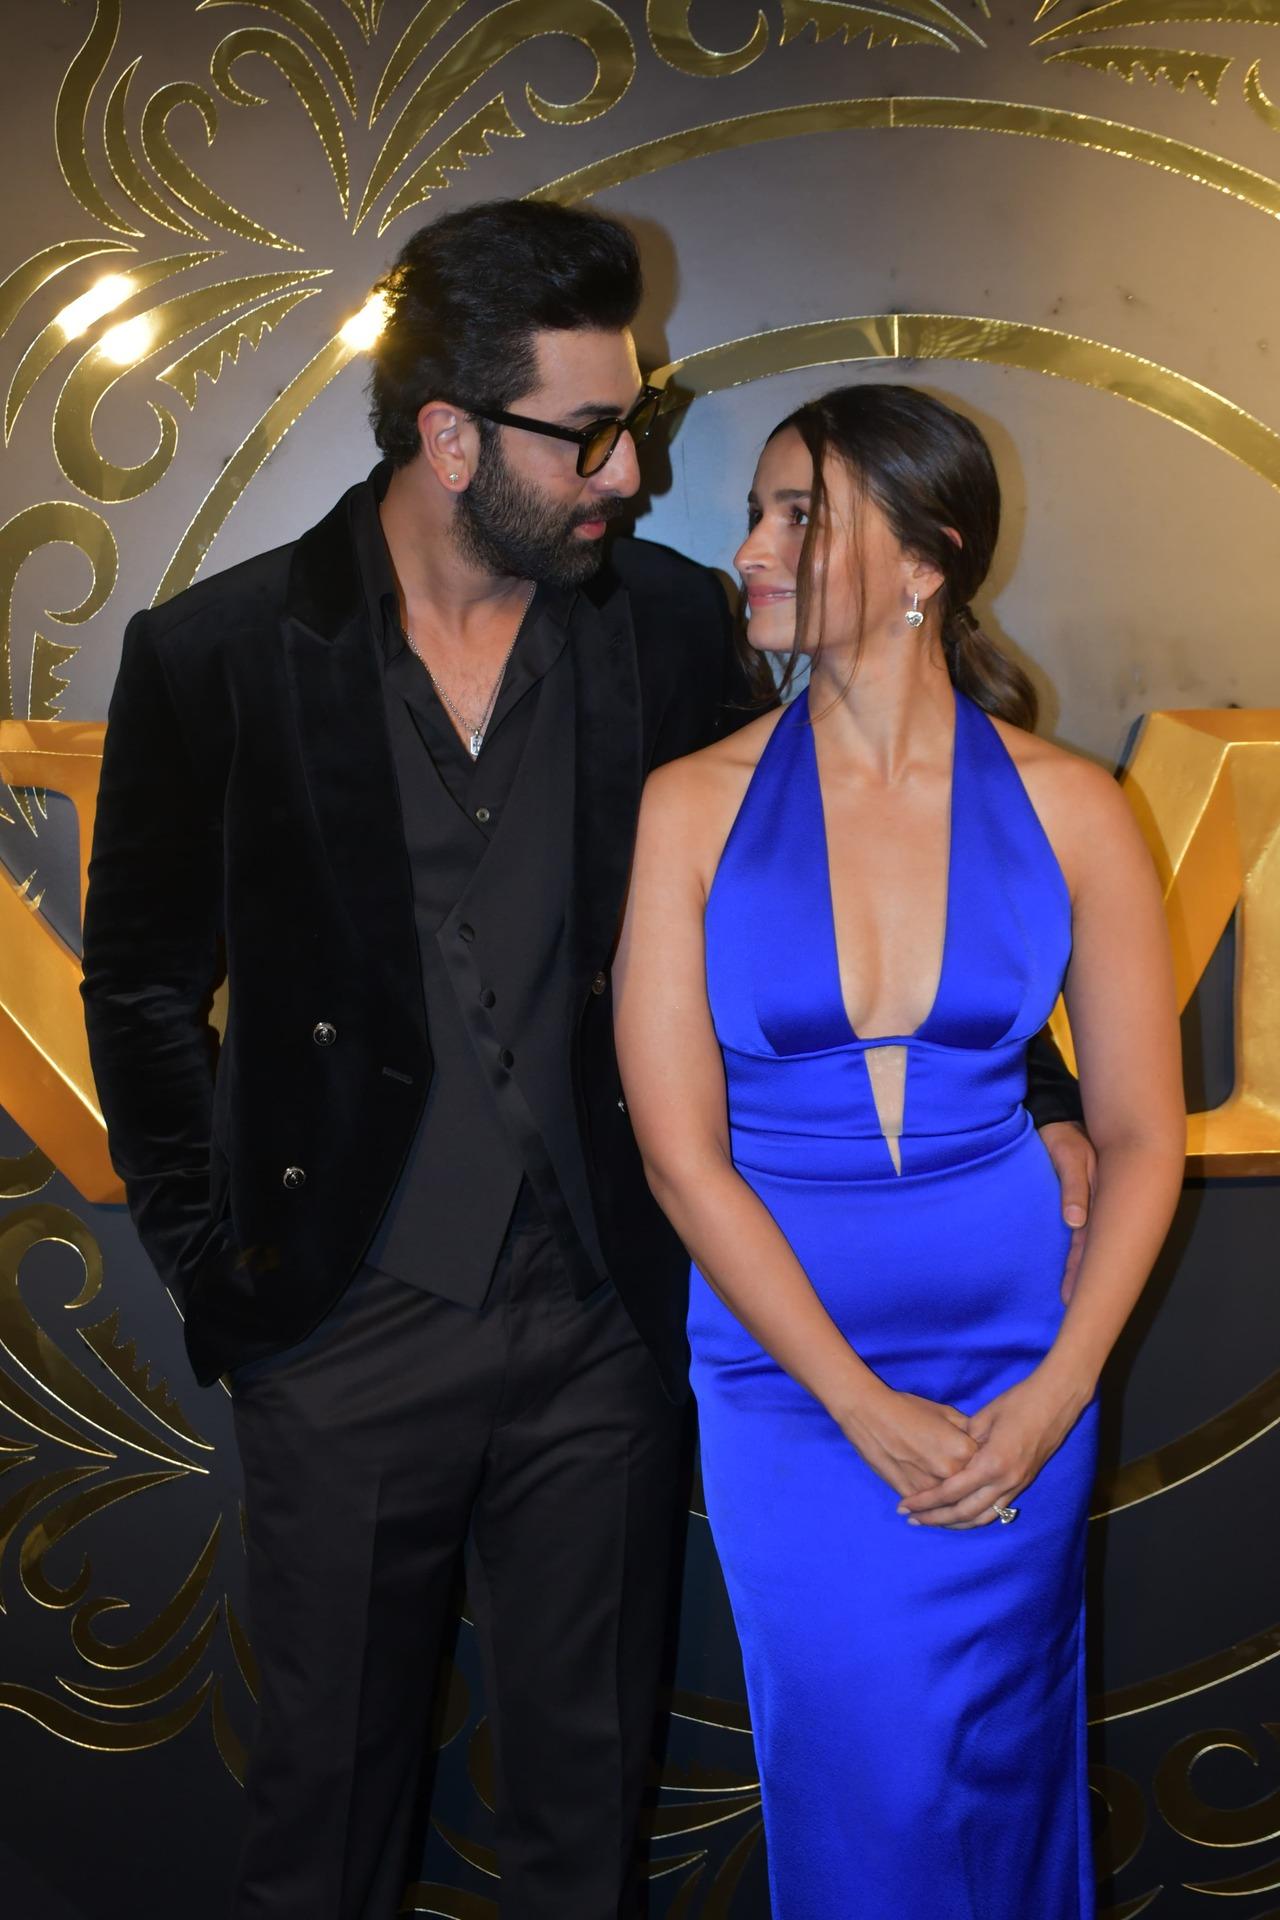 Alia Bhatt turned cheerleader for husband Ranbir at the success party. Dressed in a blue dress, the actress was seen pushing Ranbir to have his moment